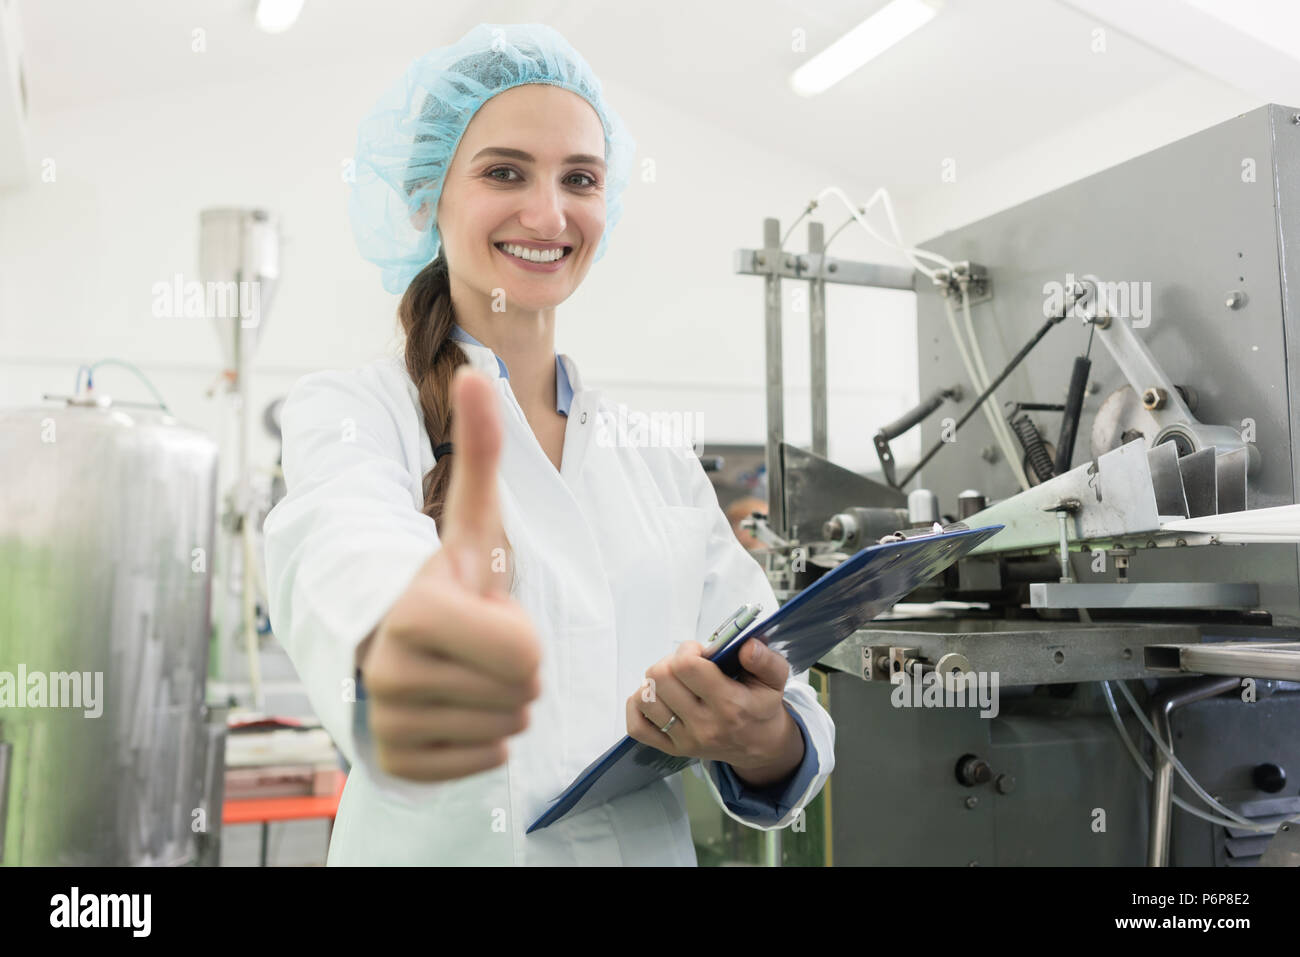 Portrait of happy woman manufacturing specialist showing thumbs up Stock Photo